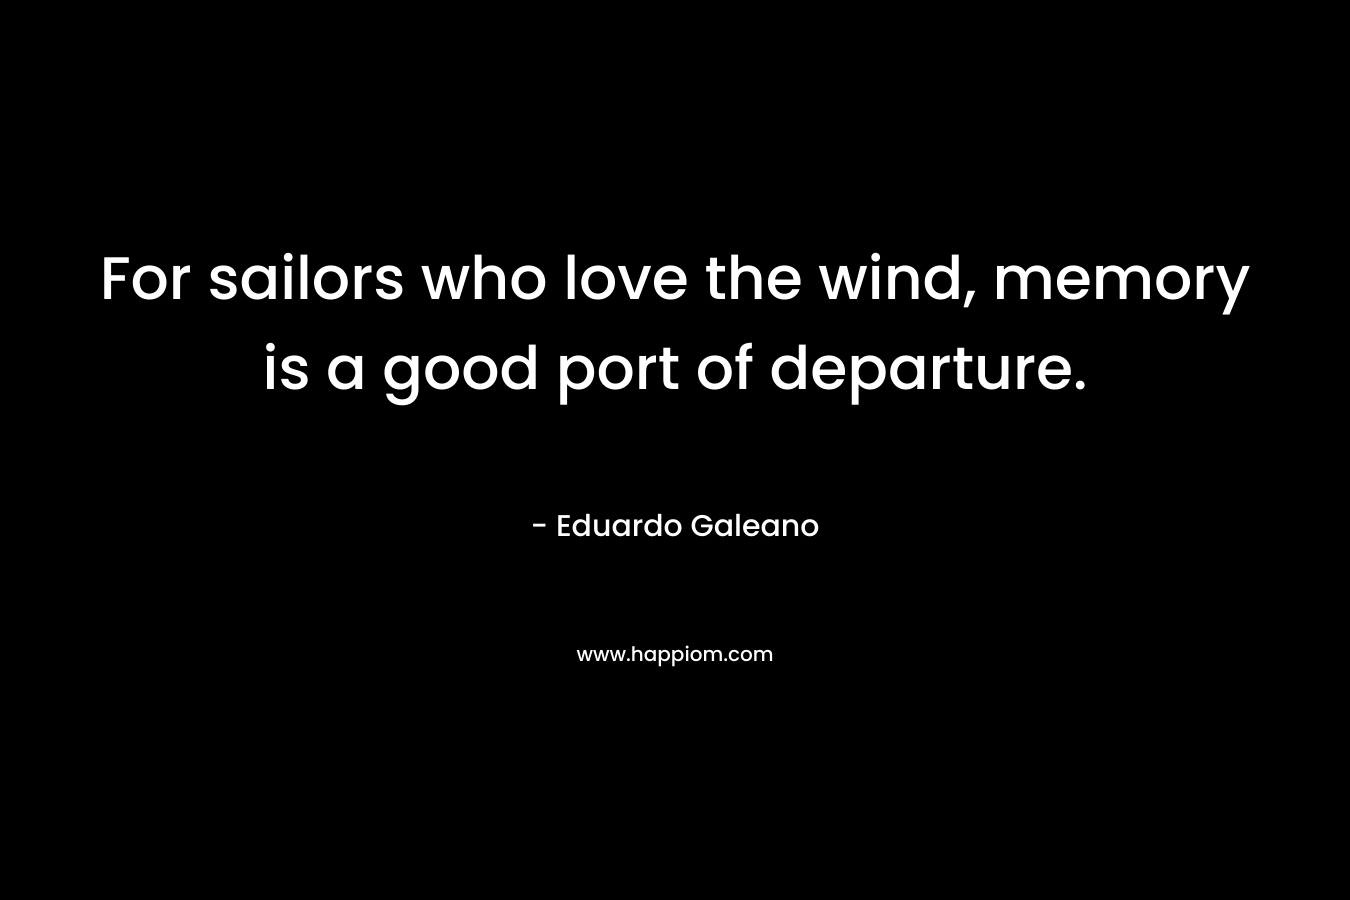 For sailors who love the wind, memory is a good port of departure. – Eduardo Galeano